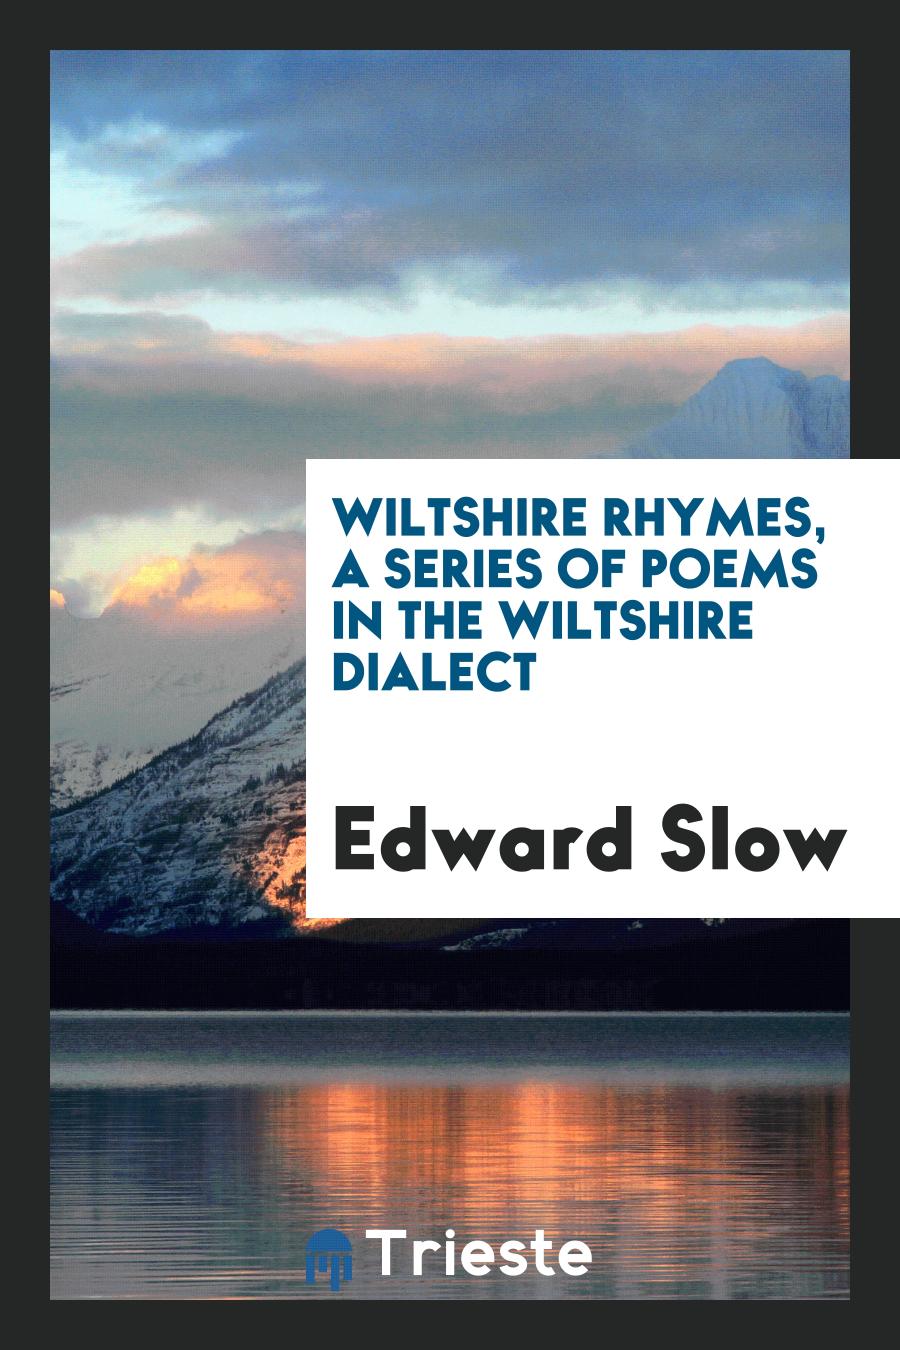 Wiltshire Rhymes, a Series of Poems in the Wiltshire Dialect